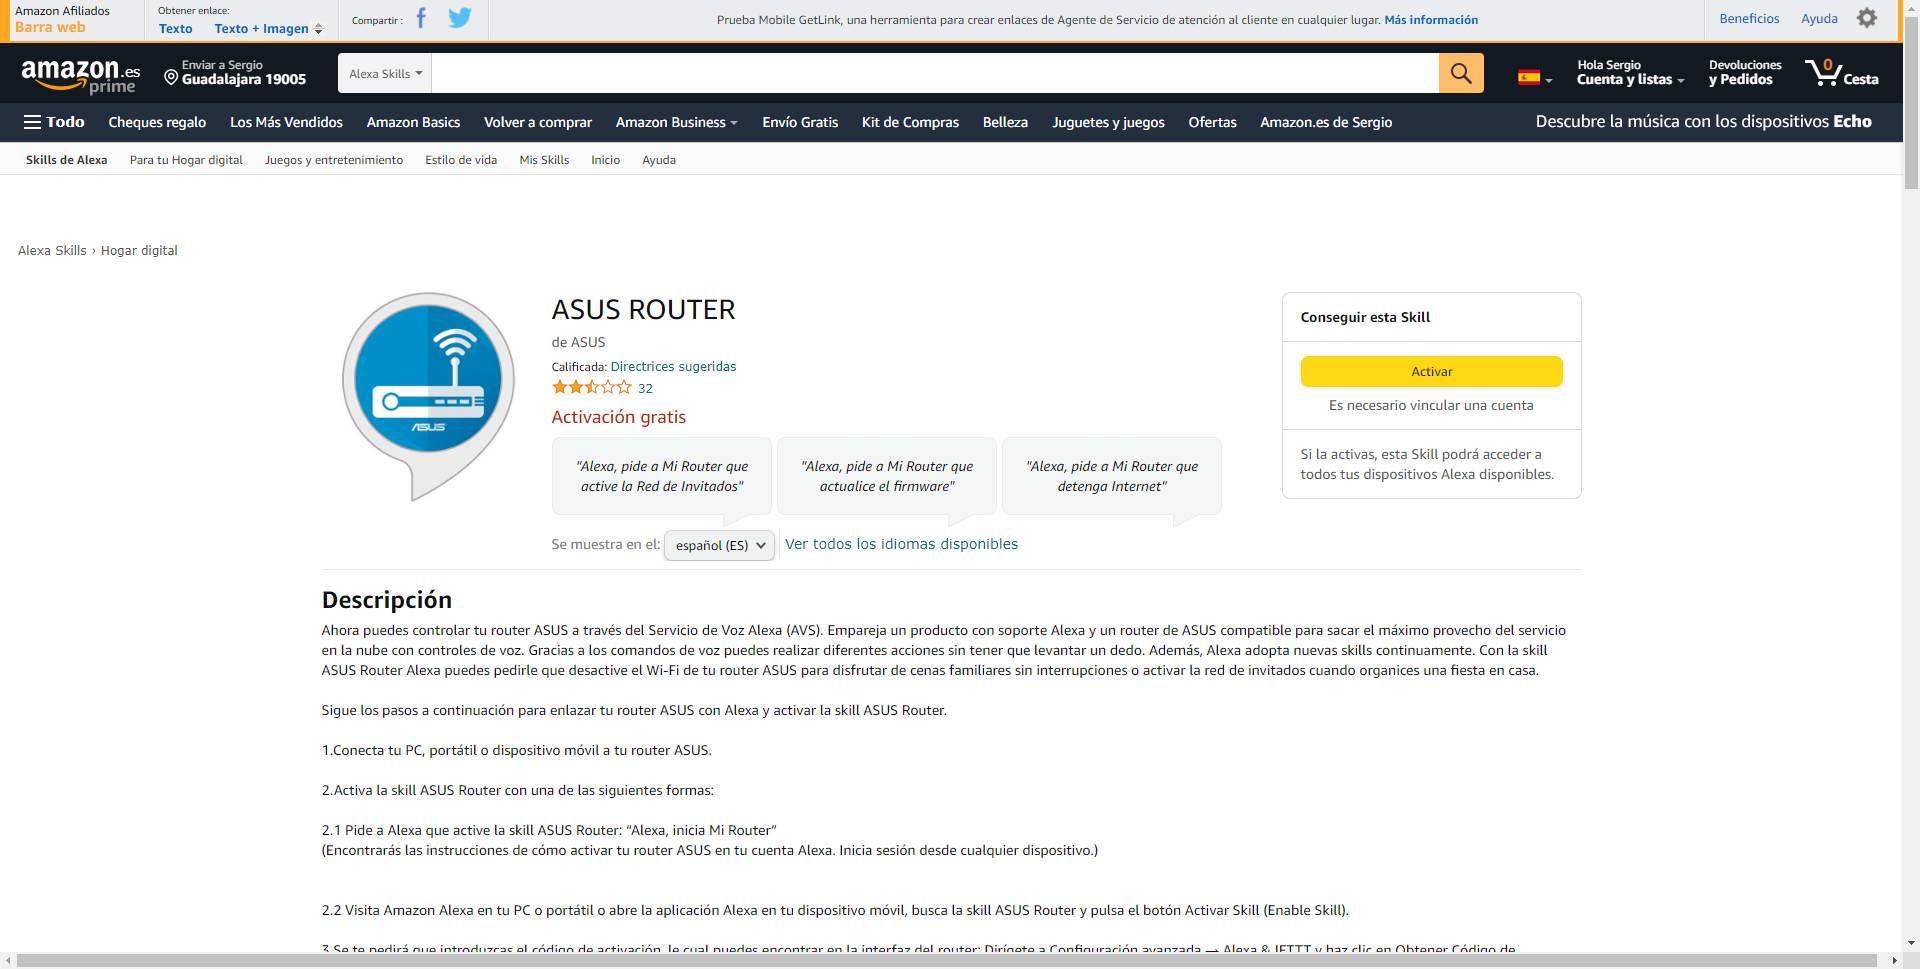 How to set up Amazon Alexa on an ASUS router to send commands